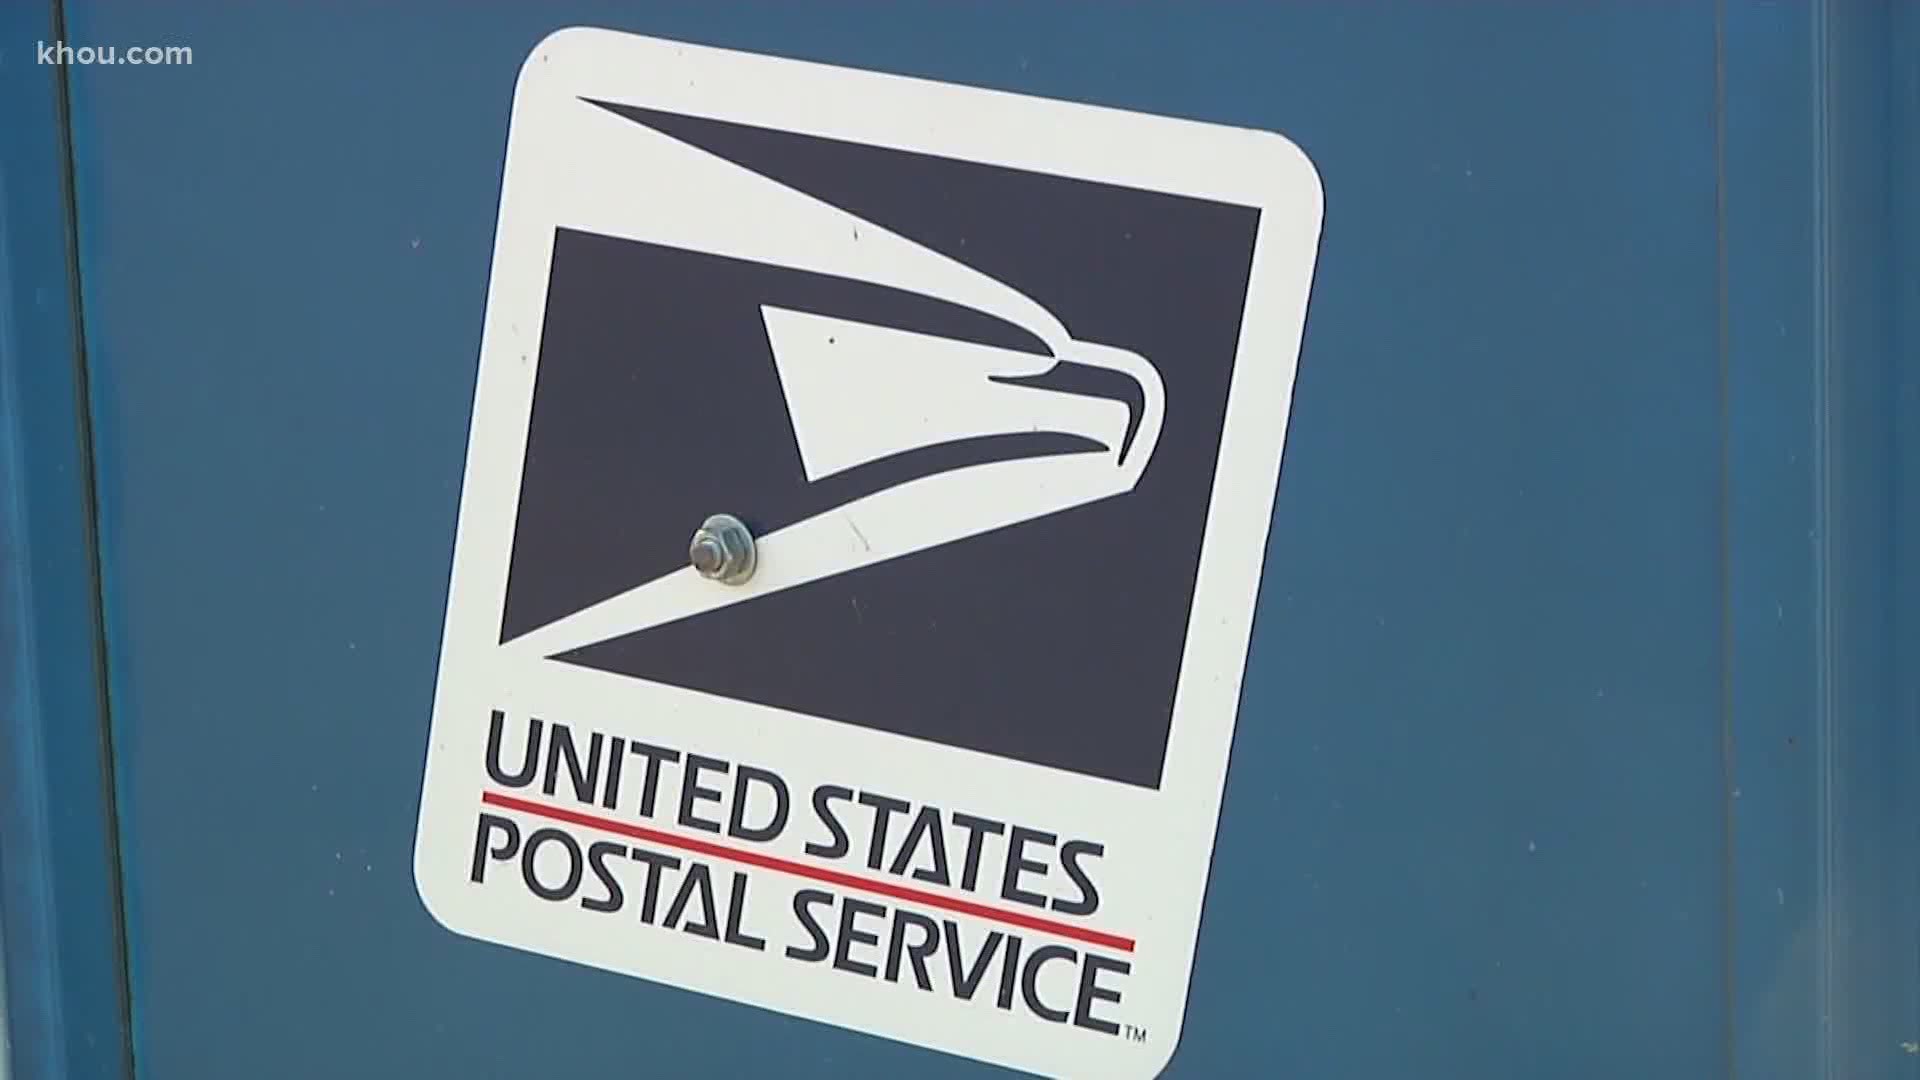 The postmaster general said he would “suspend” his initiatives until after the election “to avoid even the appearance of impact on election mail.”